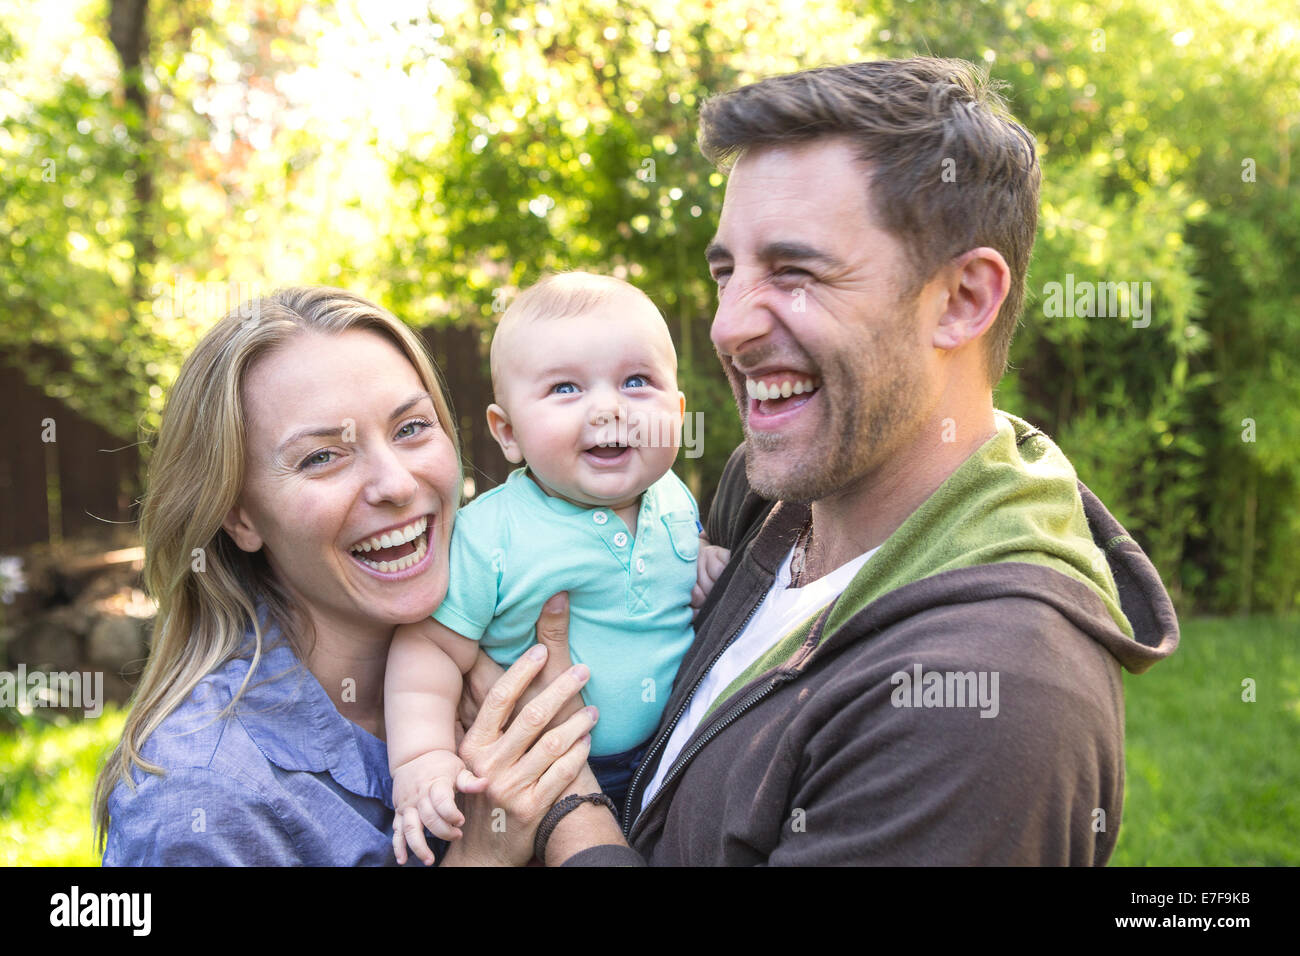 Caucasian couple holding baby in backyard Banque D'Images